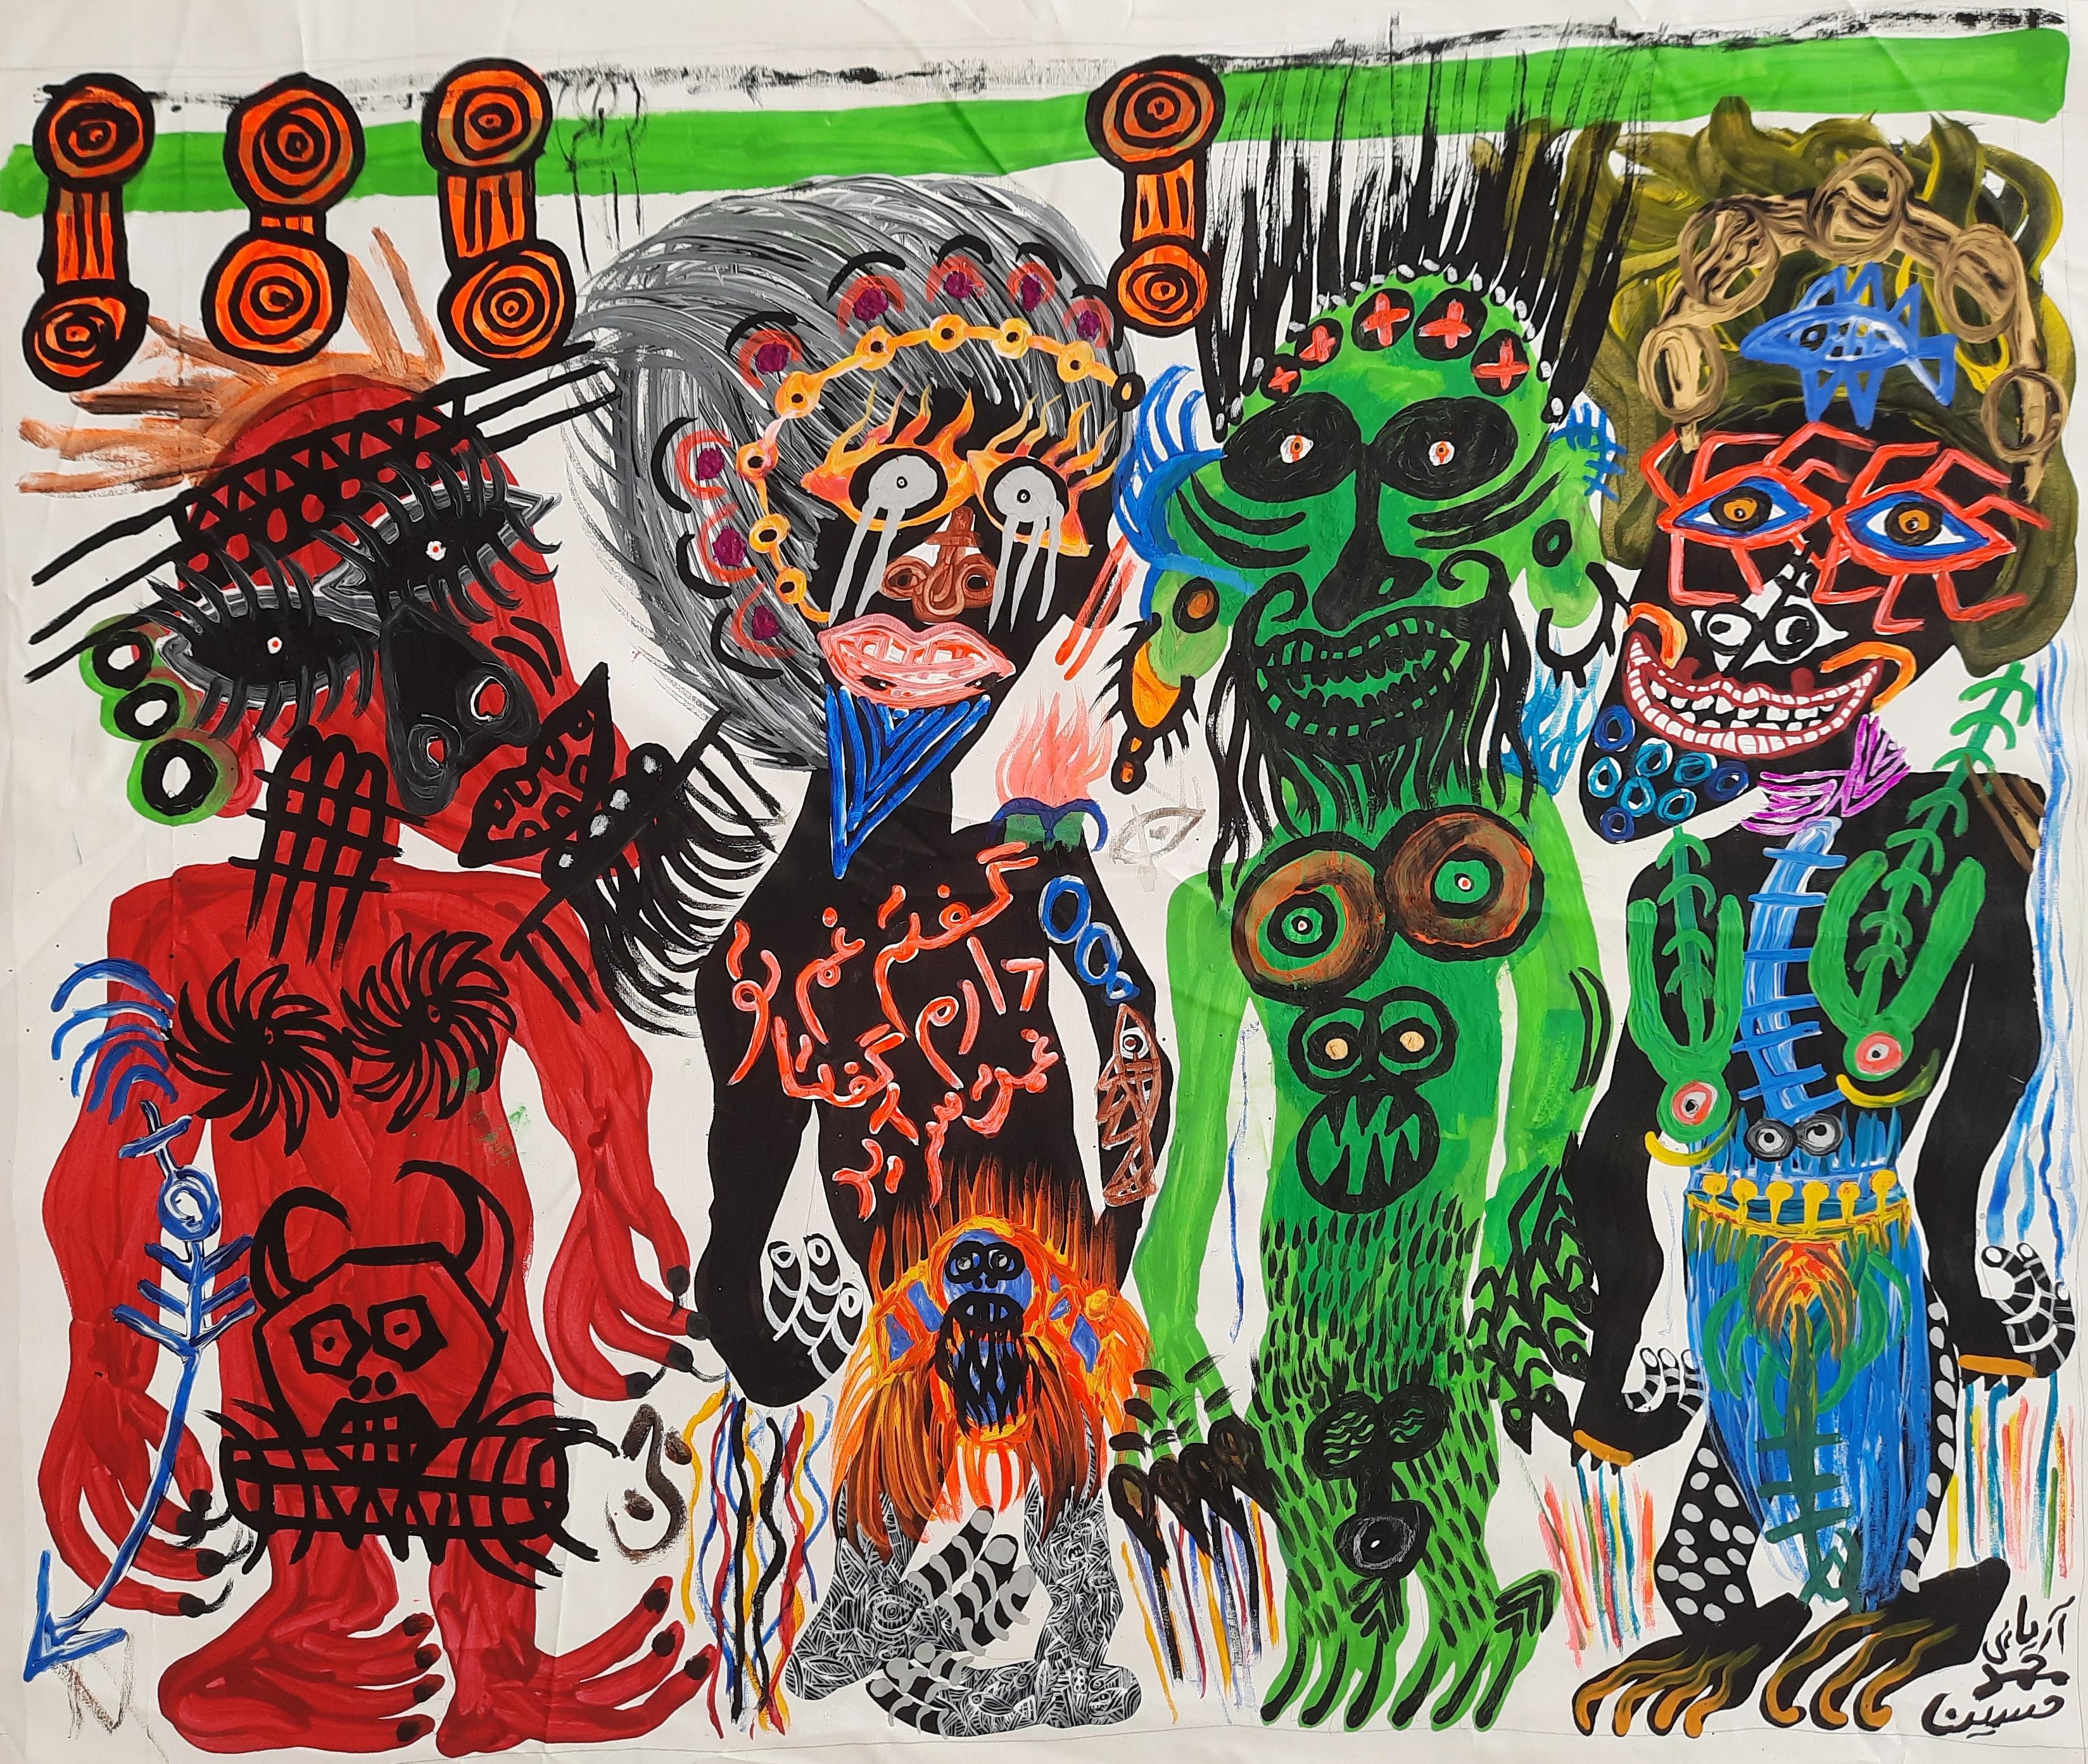 Acrylic paint on canvas
Hand-signed lower right

« Here the barbaric or savage ceremonies of New Guinea take on the air of Rio carnival.
Here the vitality bursts and the colors dance the jig while thundering.
A charivari of African masks, children's